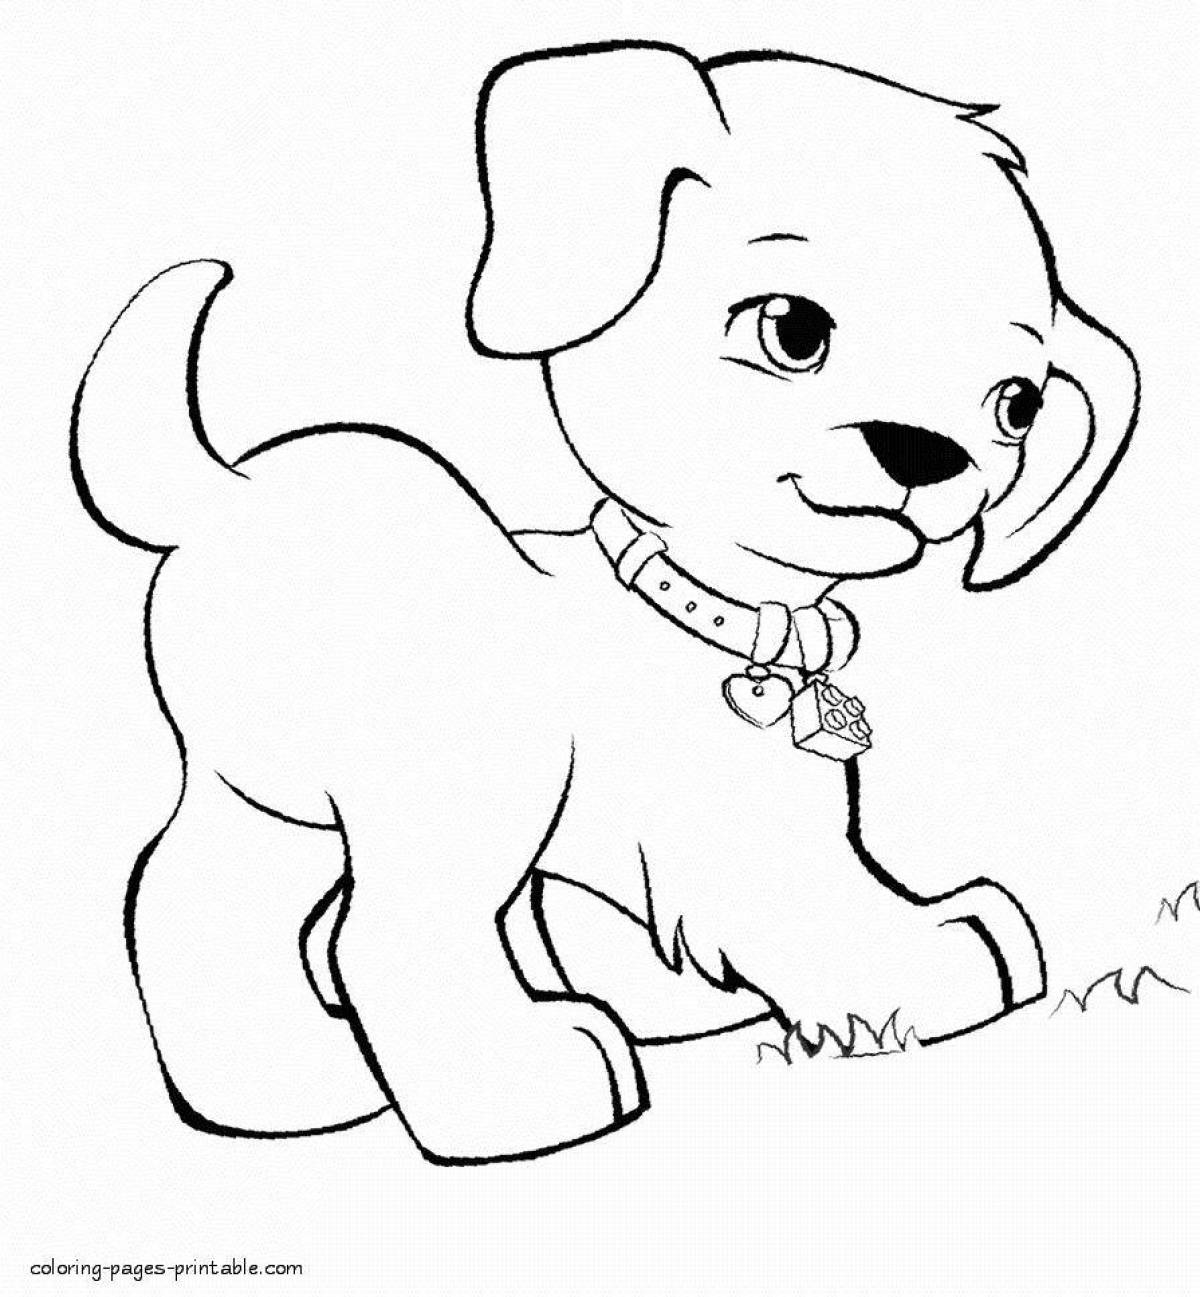 Cute cat and dog coloring page